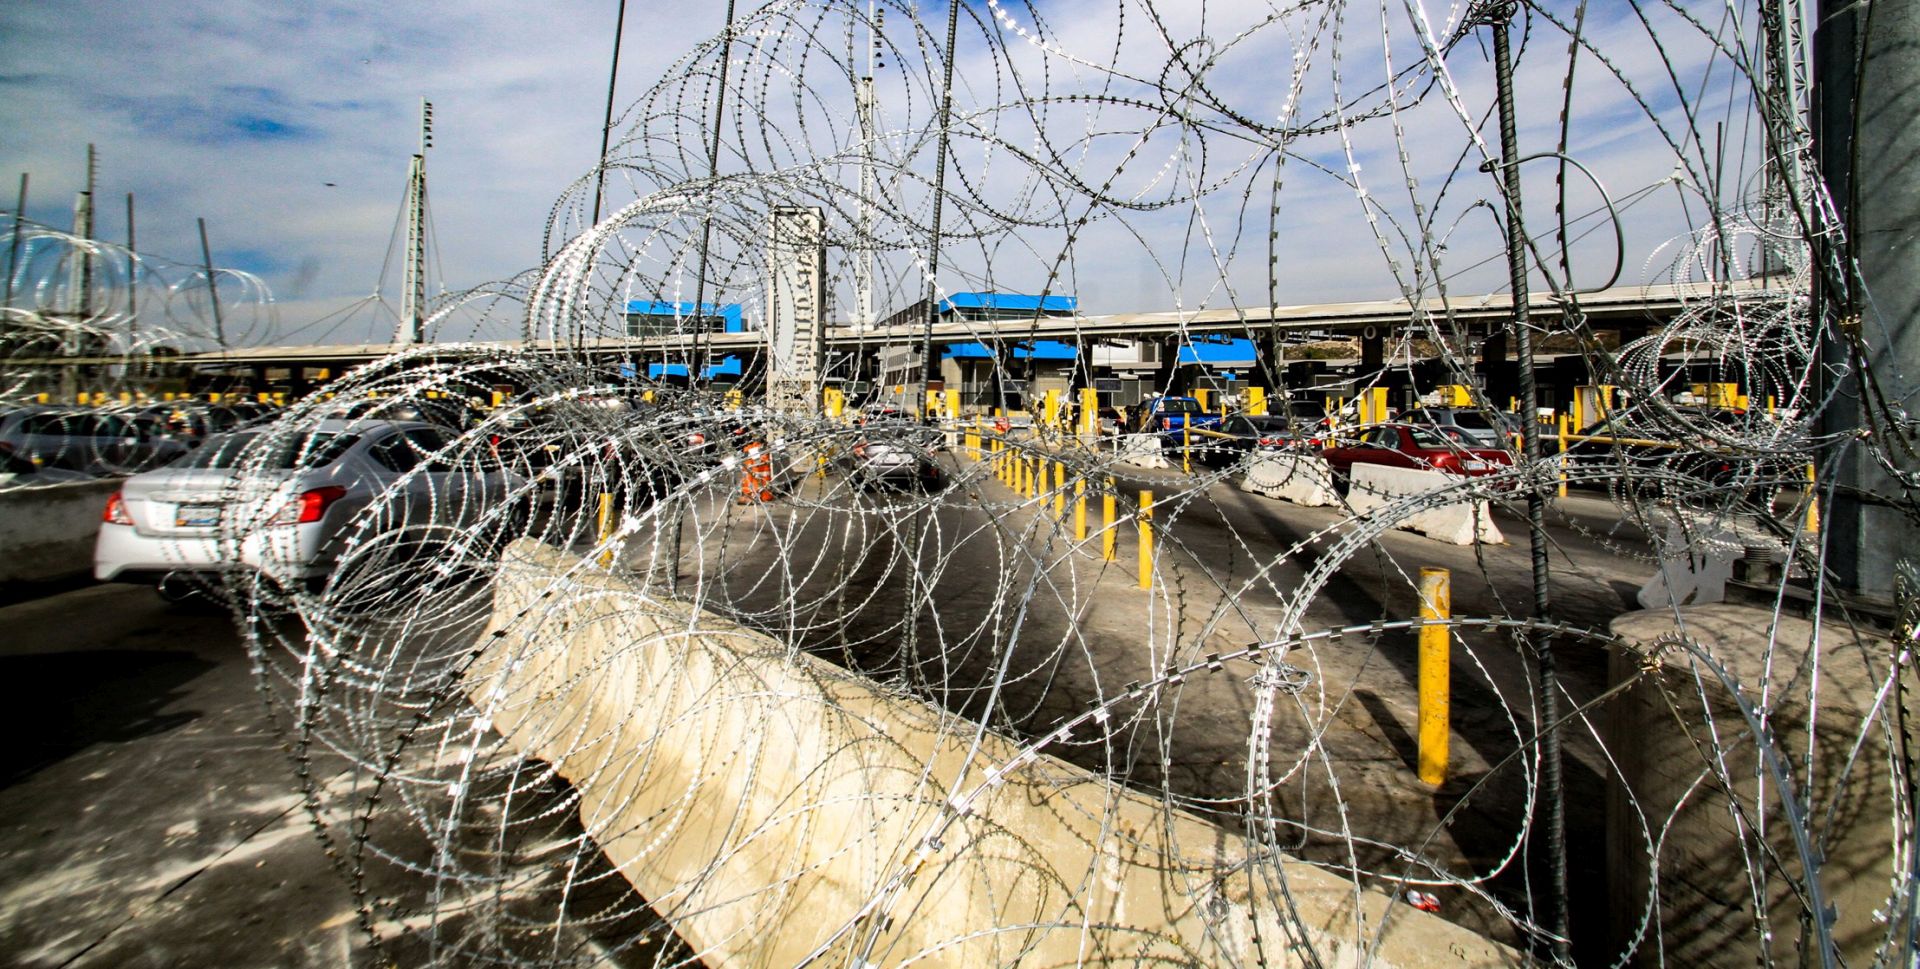 epa07178058 A view of a wire fence at the San Ysidro border checkpoint which connects San Diego and Tijuana, in Mexico, 19 November 2018. Thousands of migrants wait to demand asylum in the US as the border access has been closed for some hours in order to place 'reinforcement materials', which interrupted the crossing of vehicles and people temporarily.  EPA/Joebeth Terriquez